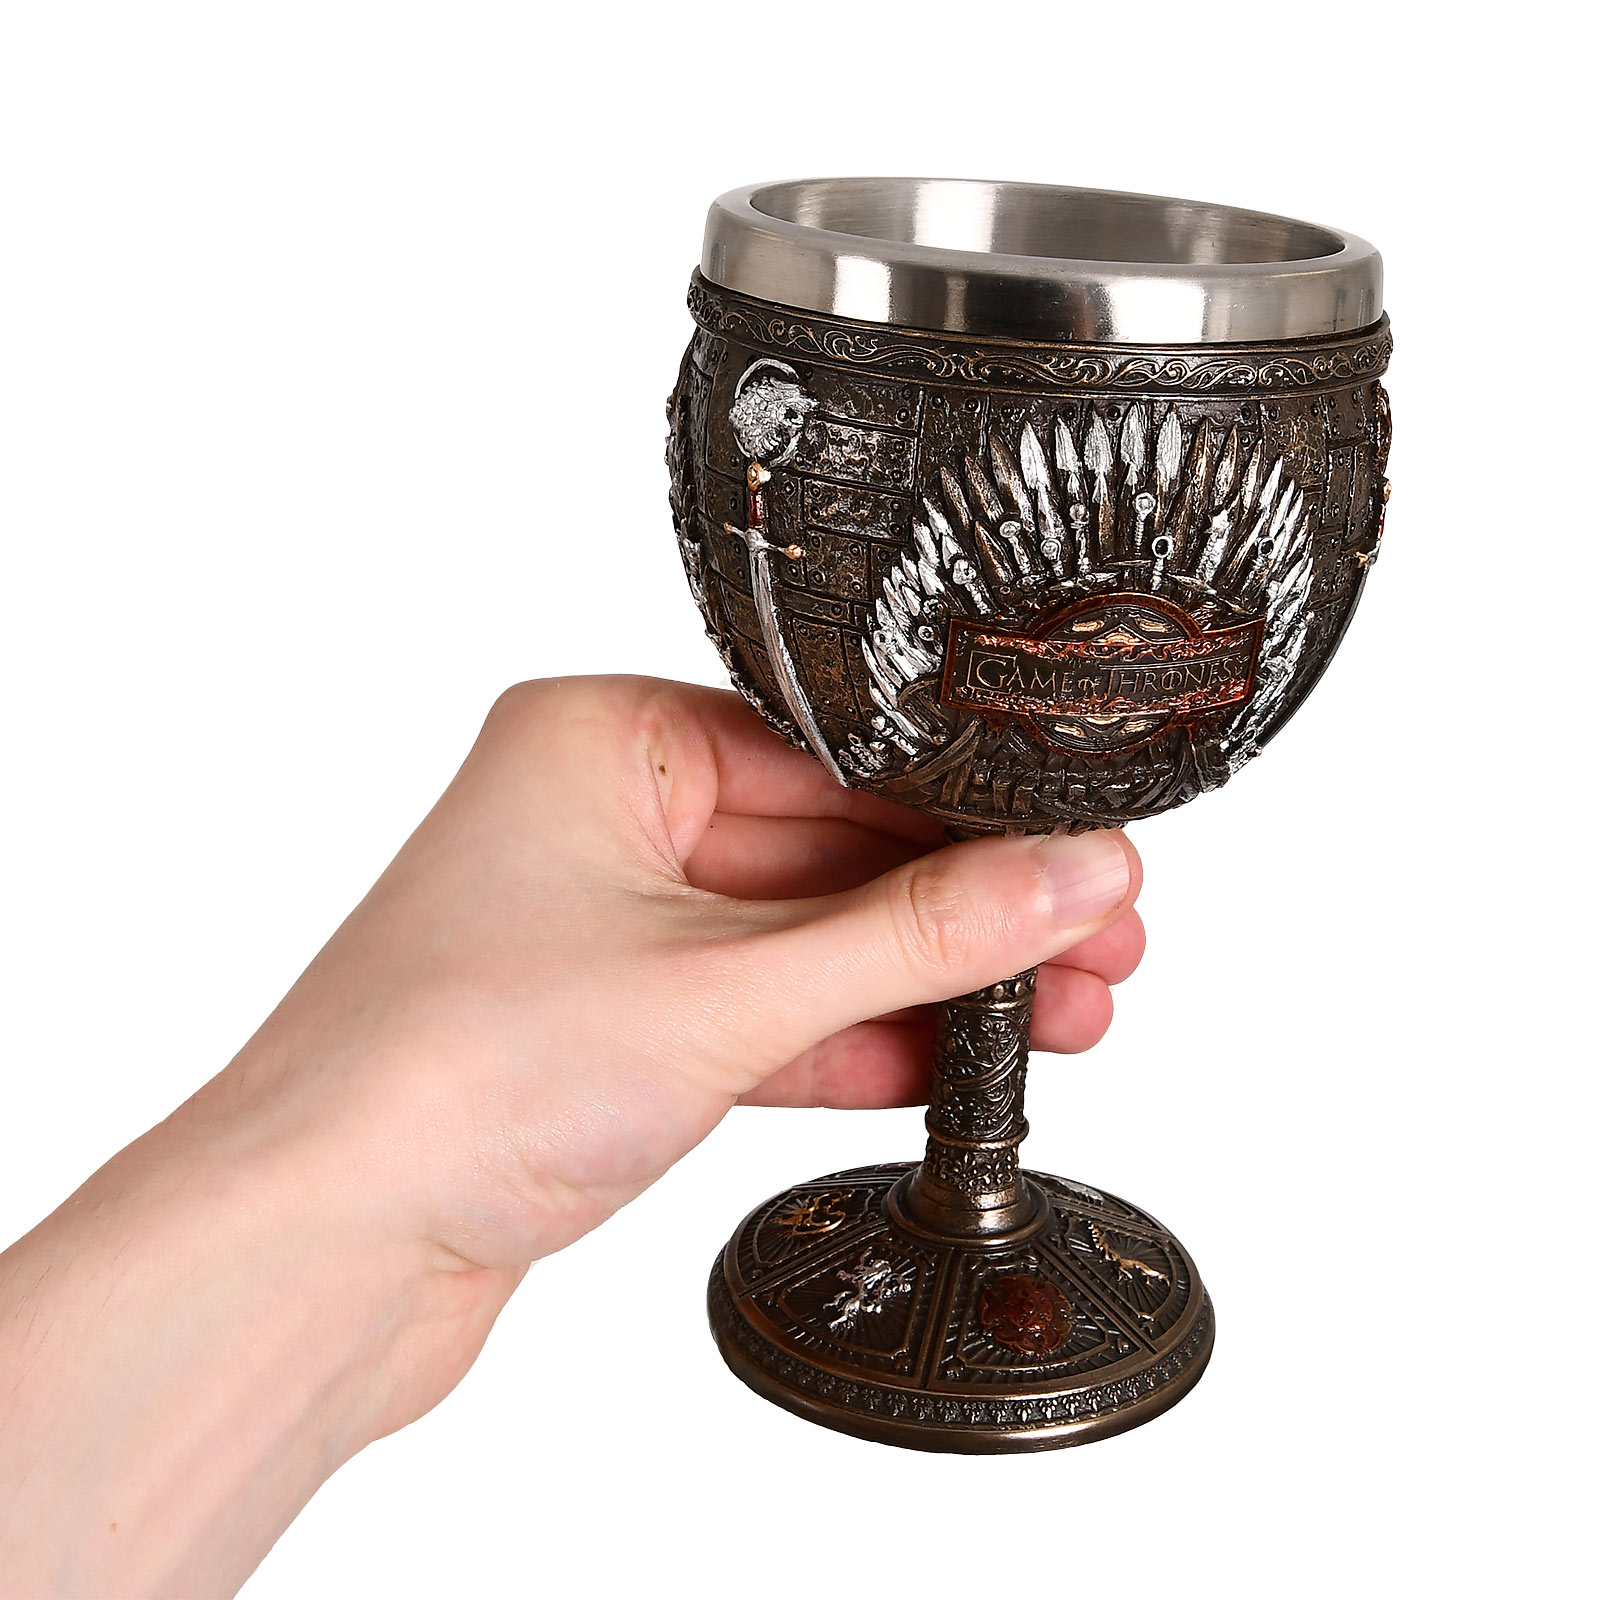 Game of Thrones - The Iron Throne Goblet deluxe